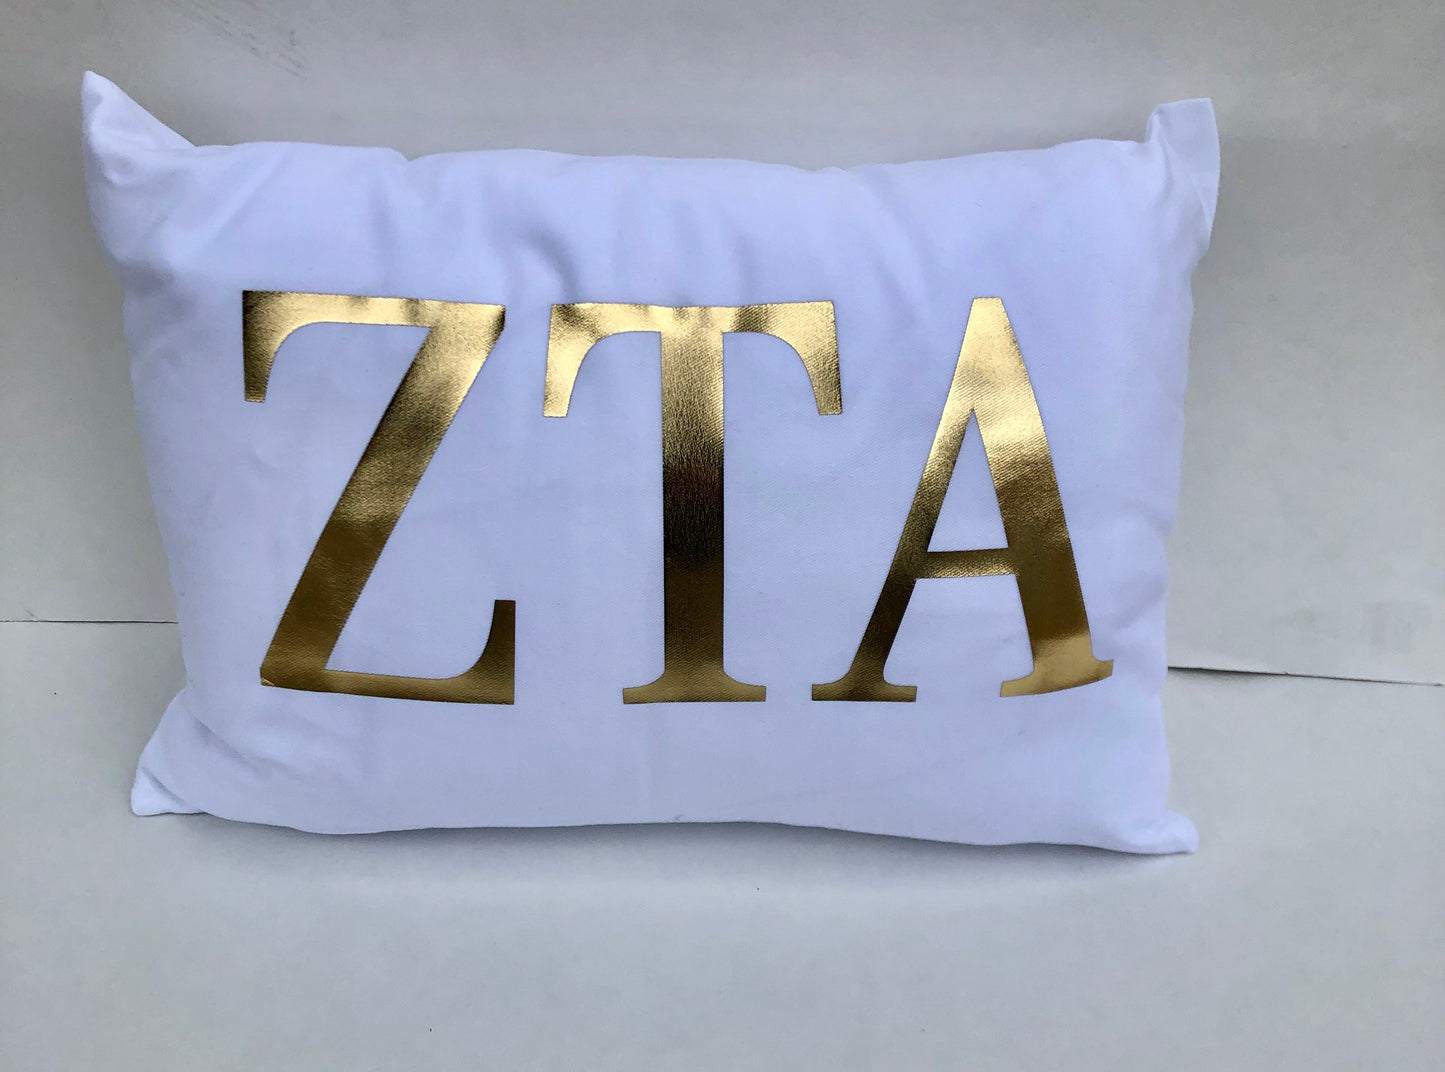 Zeta Tau Alpha White Pillow with Gold Letters